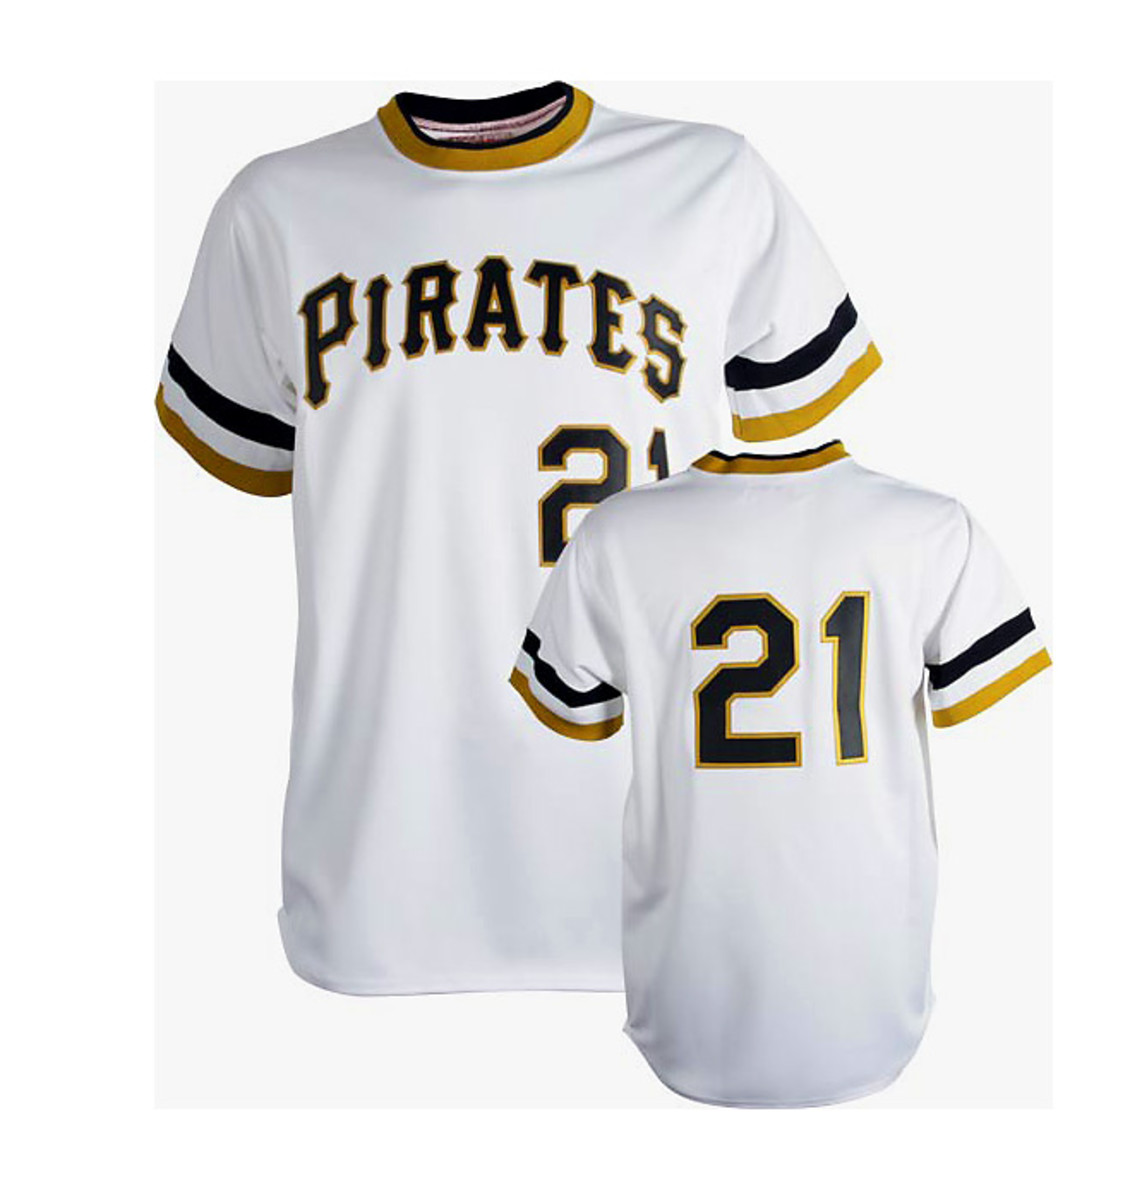 Mitchell and Ness, Pittsburgh Pirates 1971 Home Jersey - Roberto Clemente